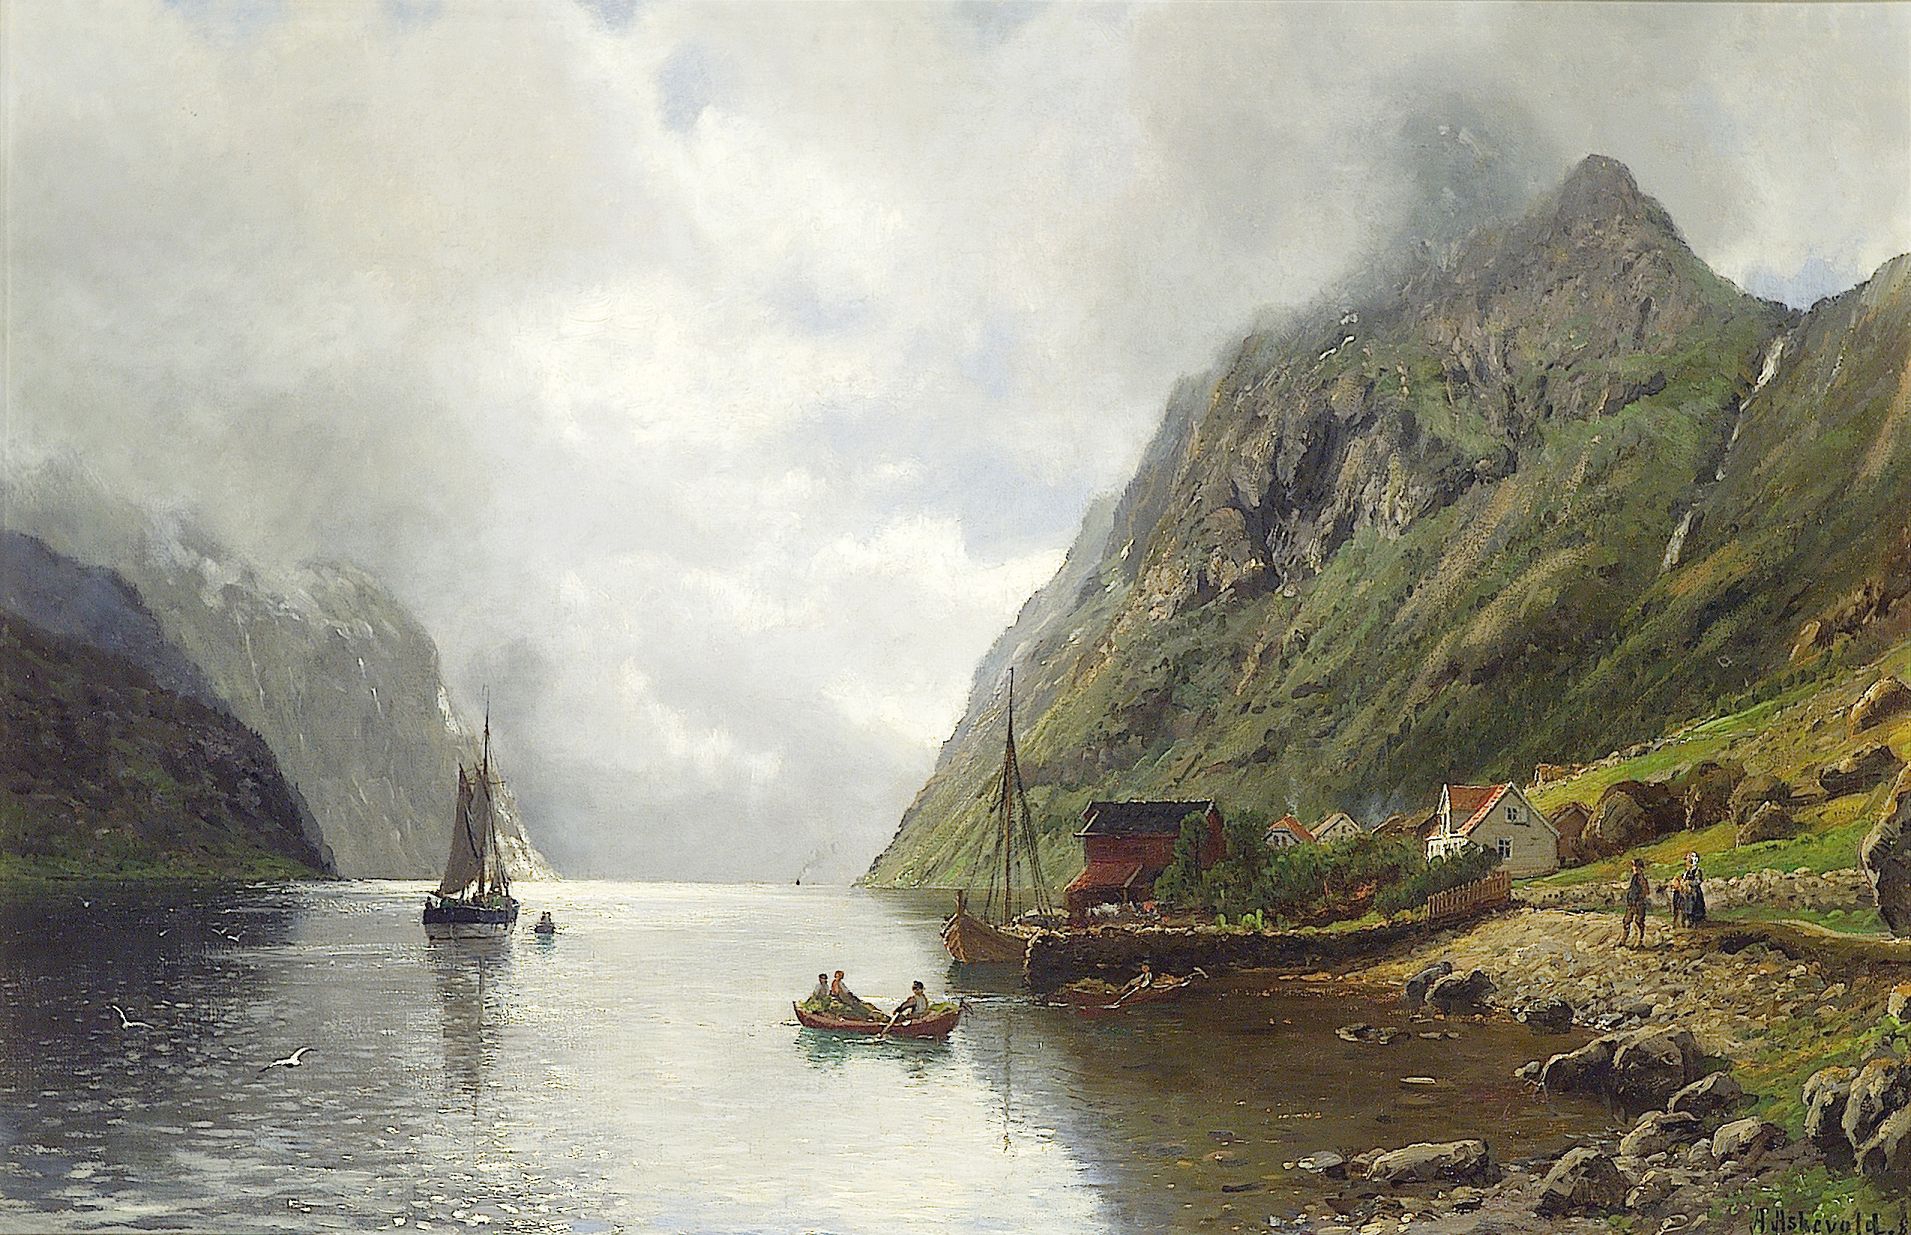 Anders Askevold, Painting, Landscape, Norway, Villages, Fjord, River, Mountains, Clouds Wallpaper